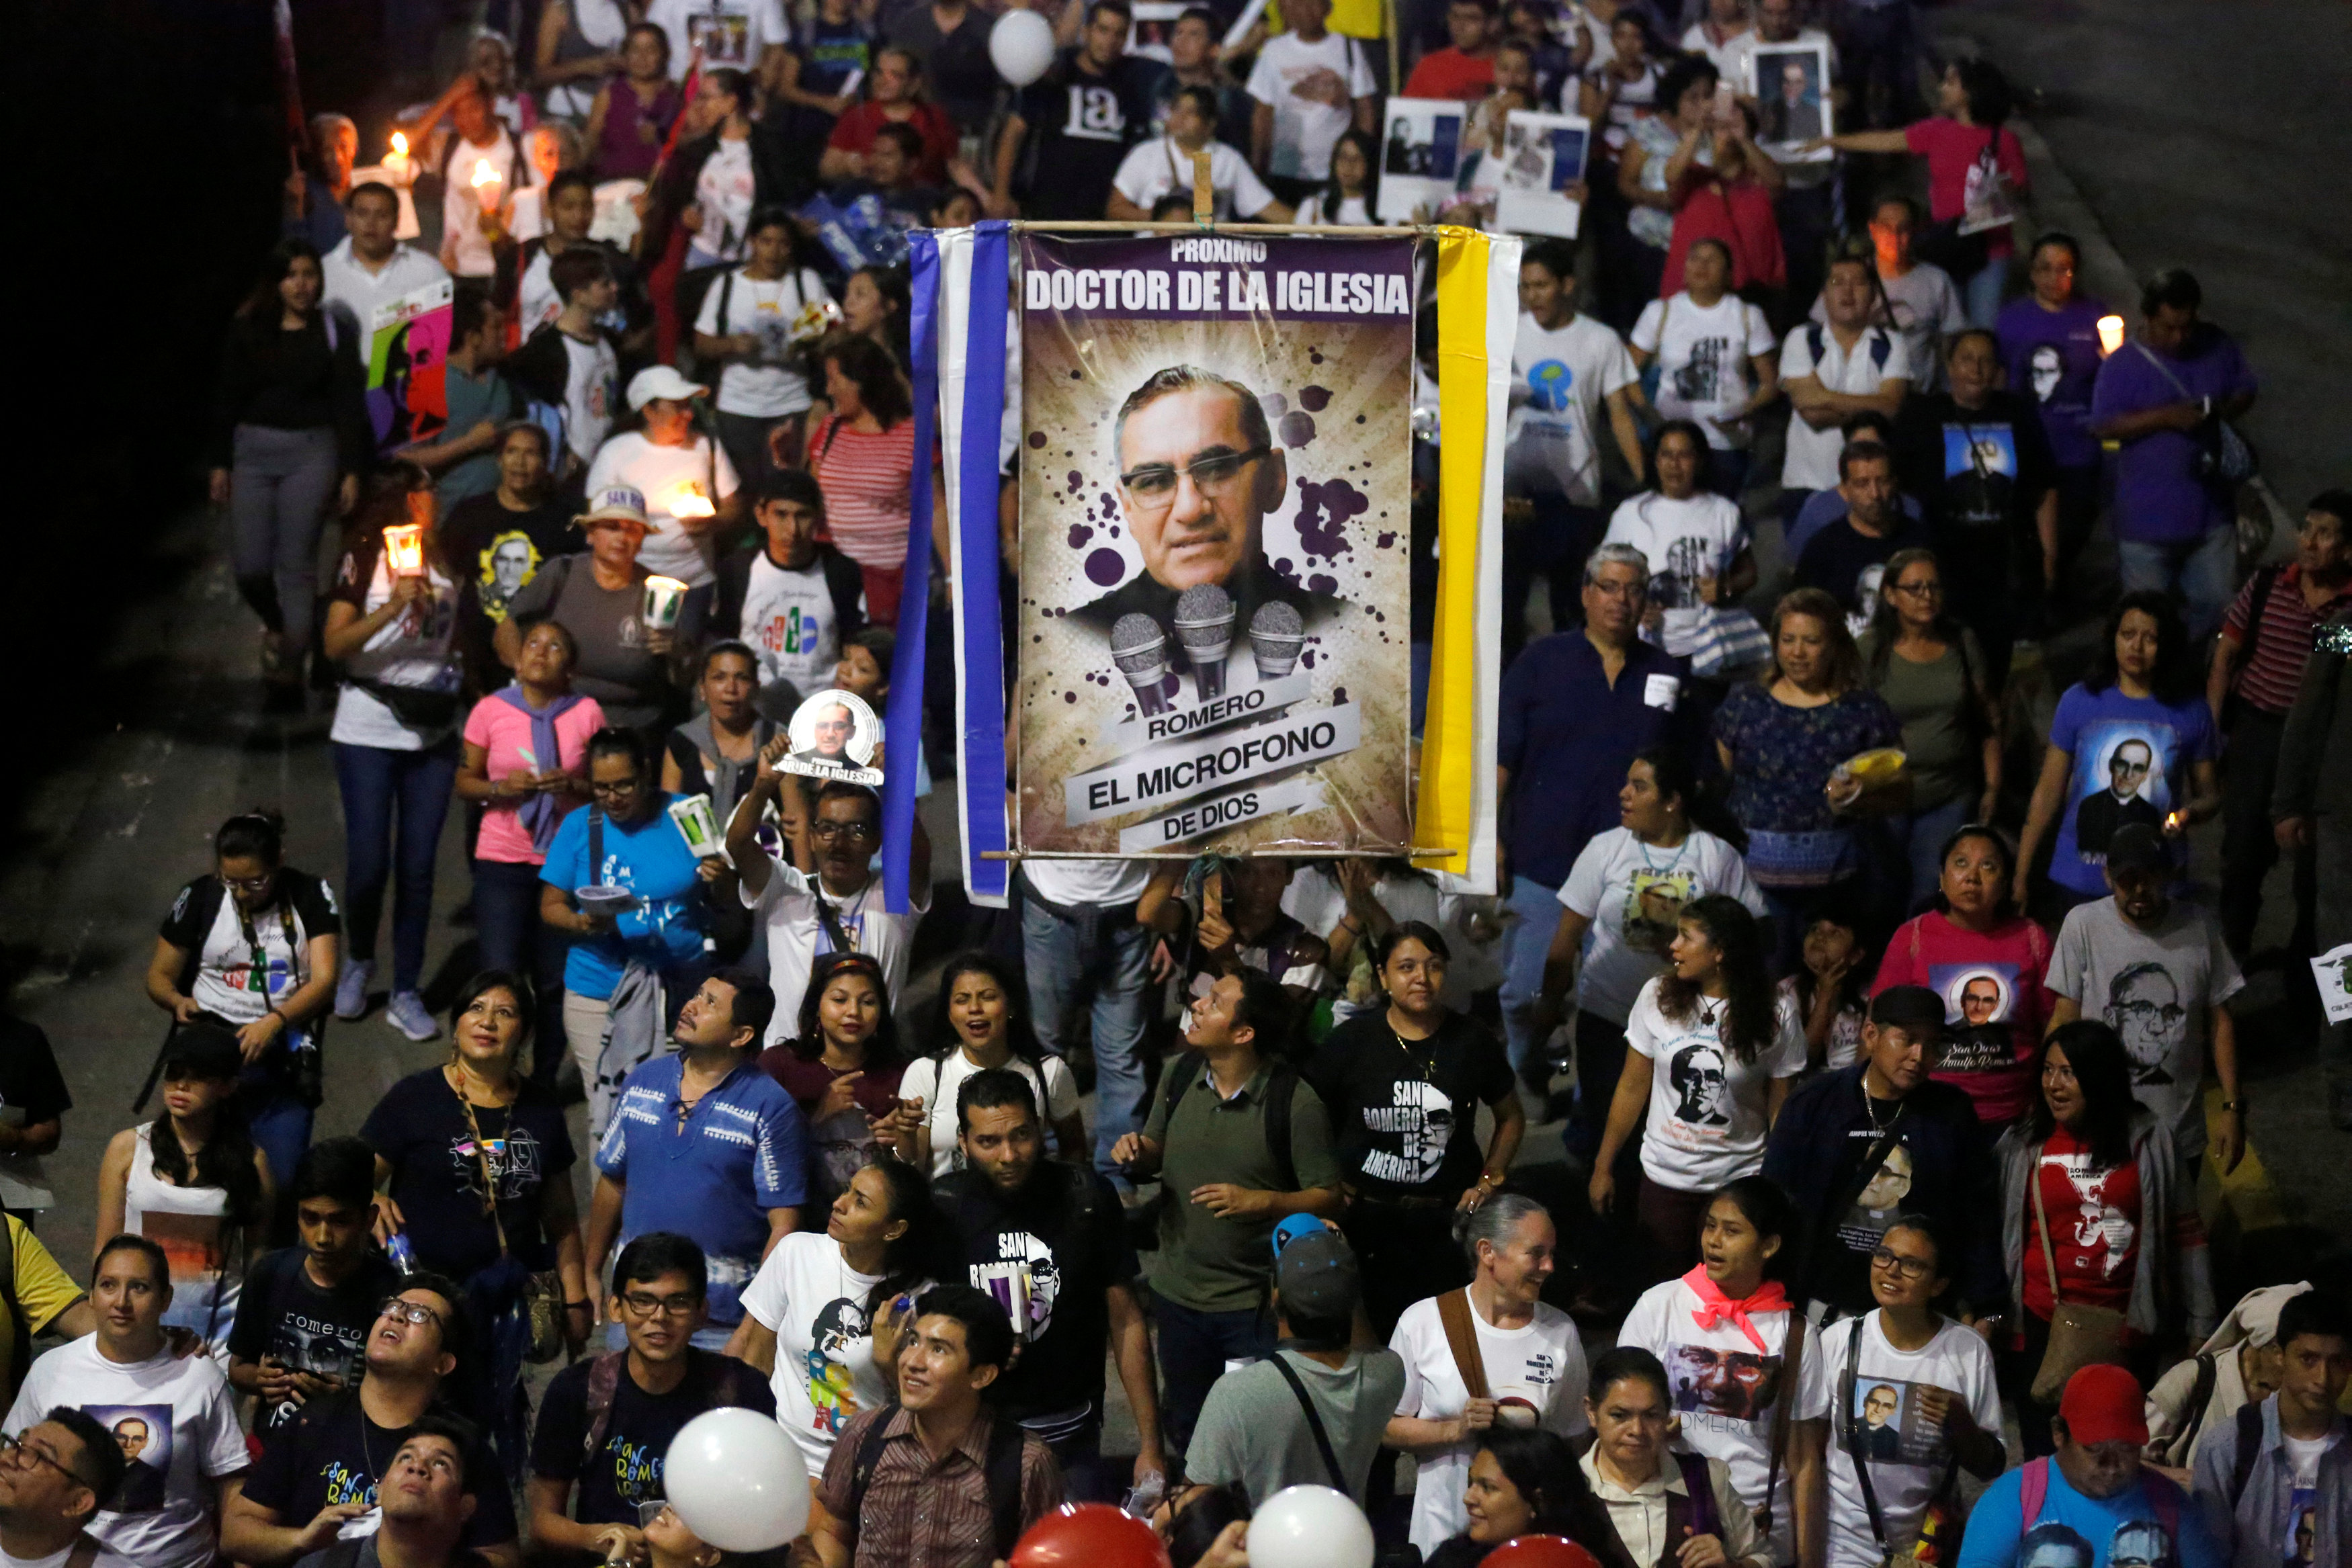 People carry a banner of St. Oscar Romero during an Oct. 13 procession in San Salvador, El Salvador. Pope Francis celebrated the canonization Mass for St. Oscar Romero and six other new saints in St. Peter's Square Oct. 14 at the Vatican. (CNS photo/Jose Cabezas, Reuters)